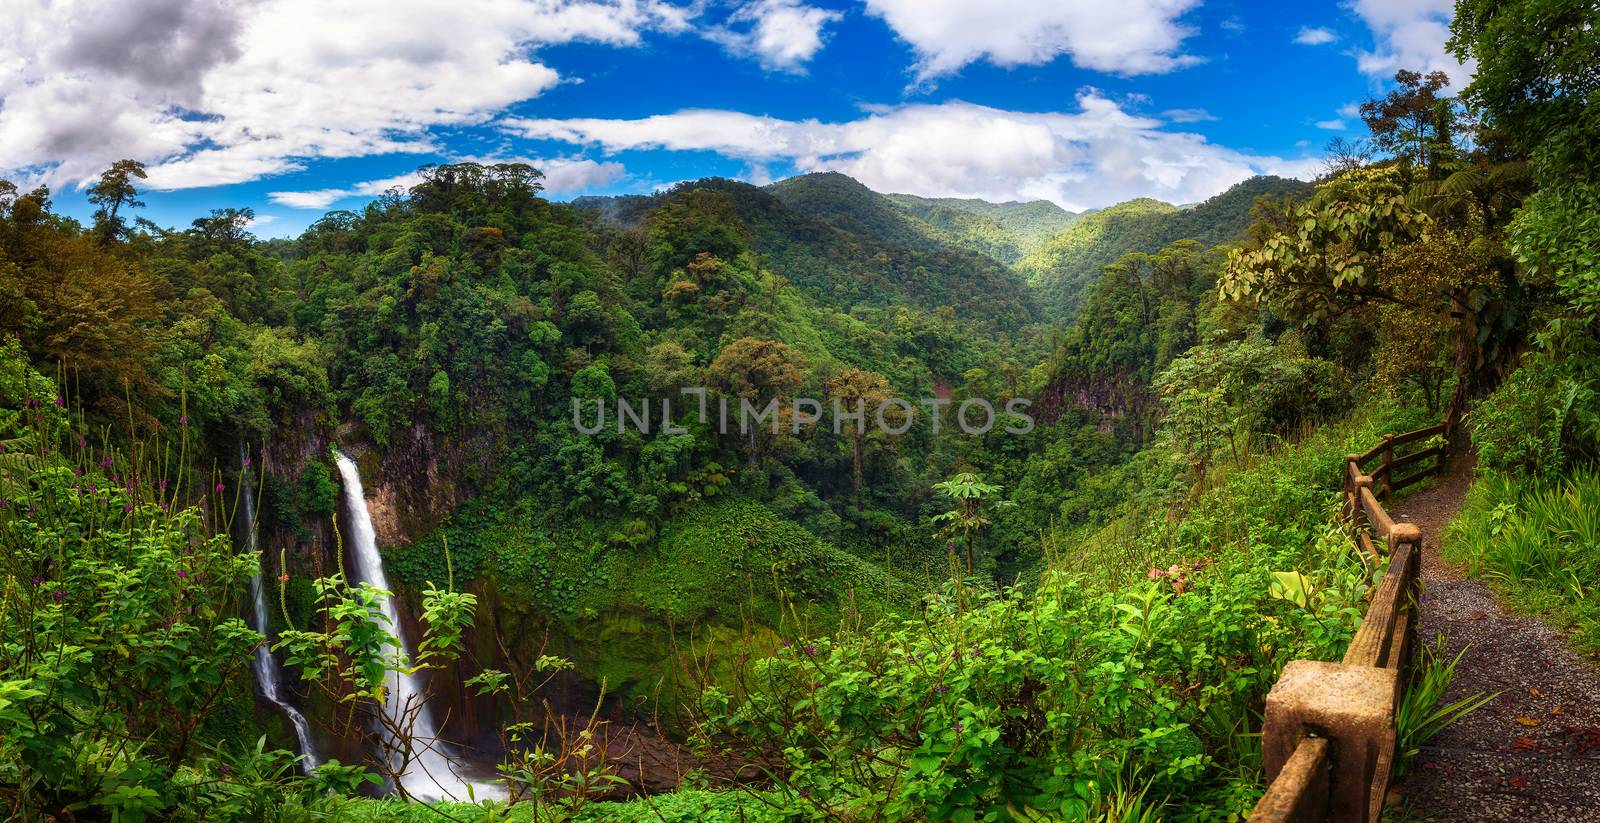 Catarata del Toro waterfall with surrounding mountains in Costa Rica by nickfox